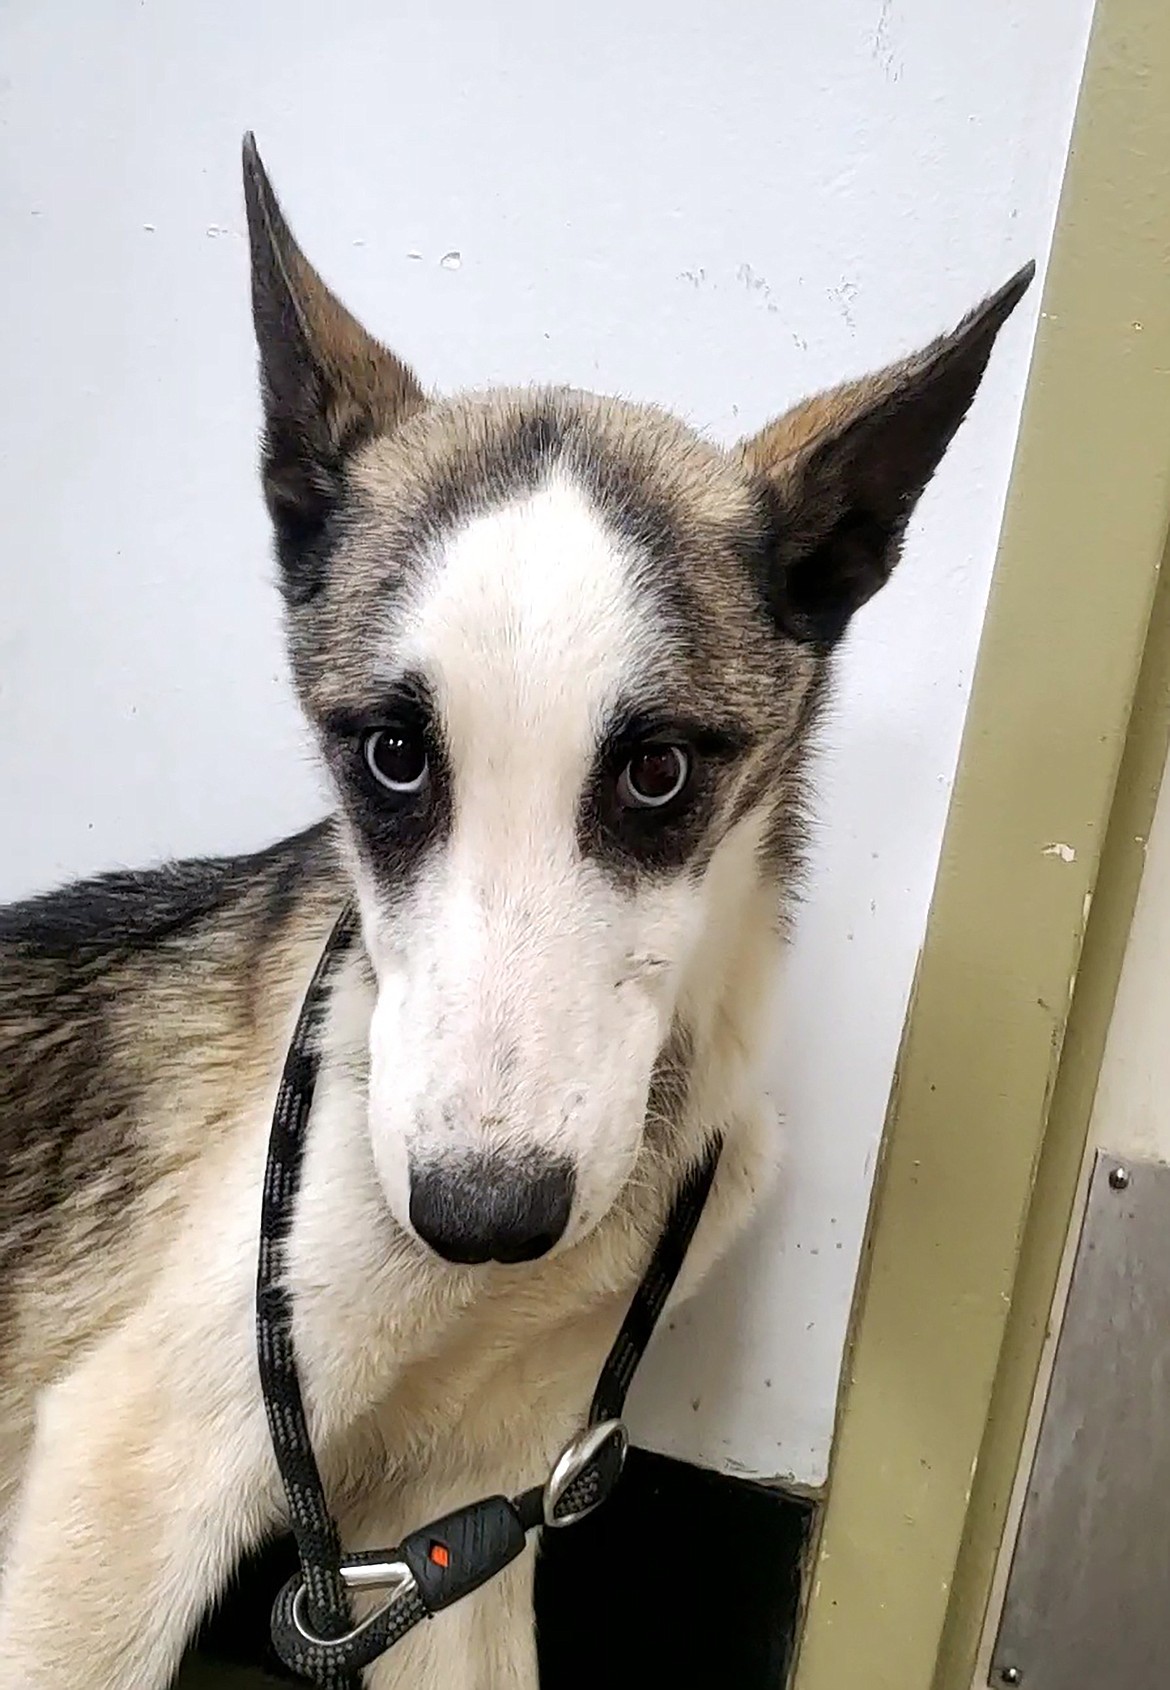 One of at least 18 dogs found abandoned at several locations in the area. The discovery has lead to an animal neglect investigation by the Bonner County Sheriff's Office.